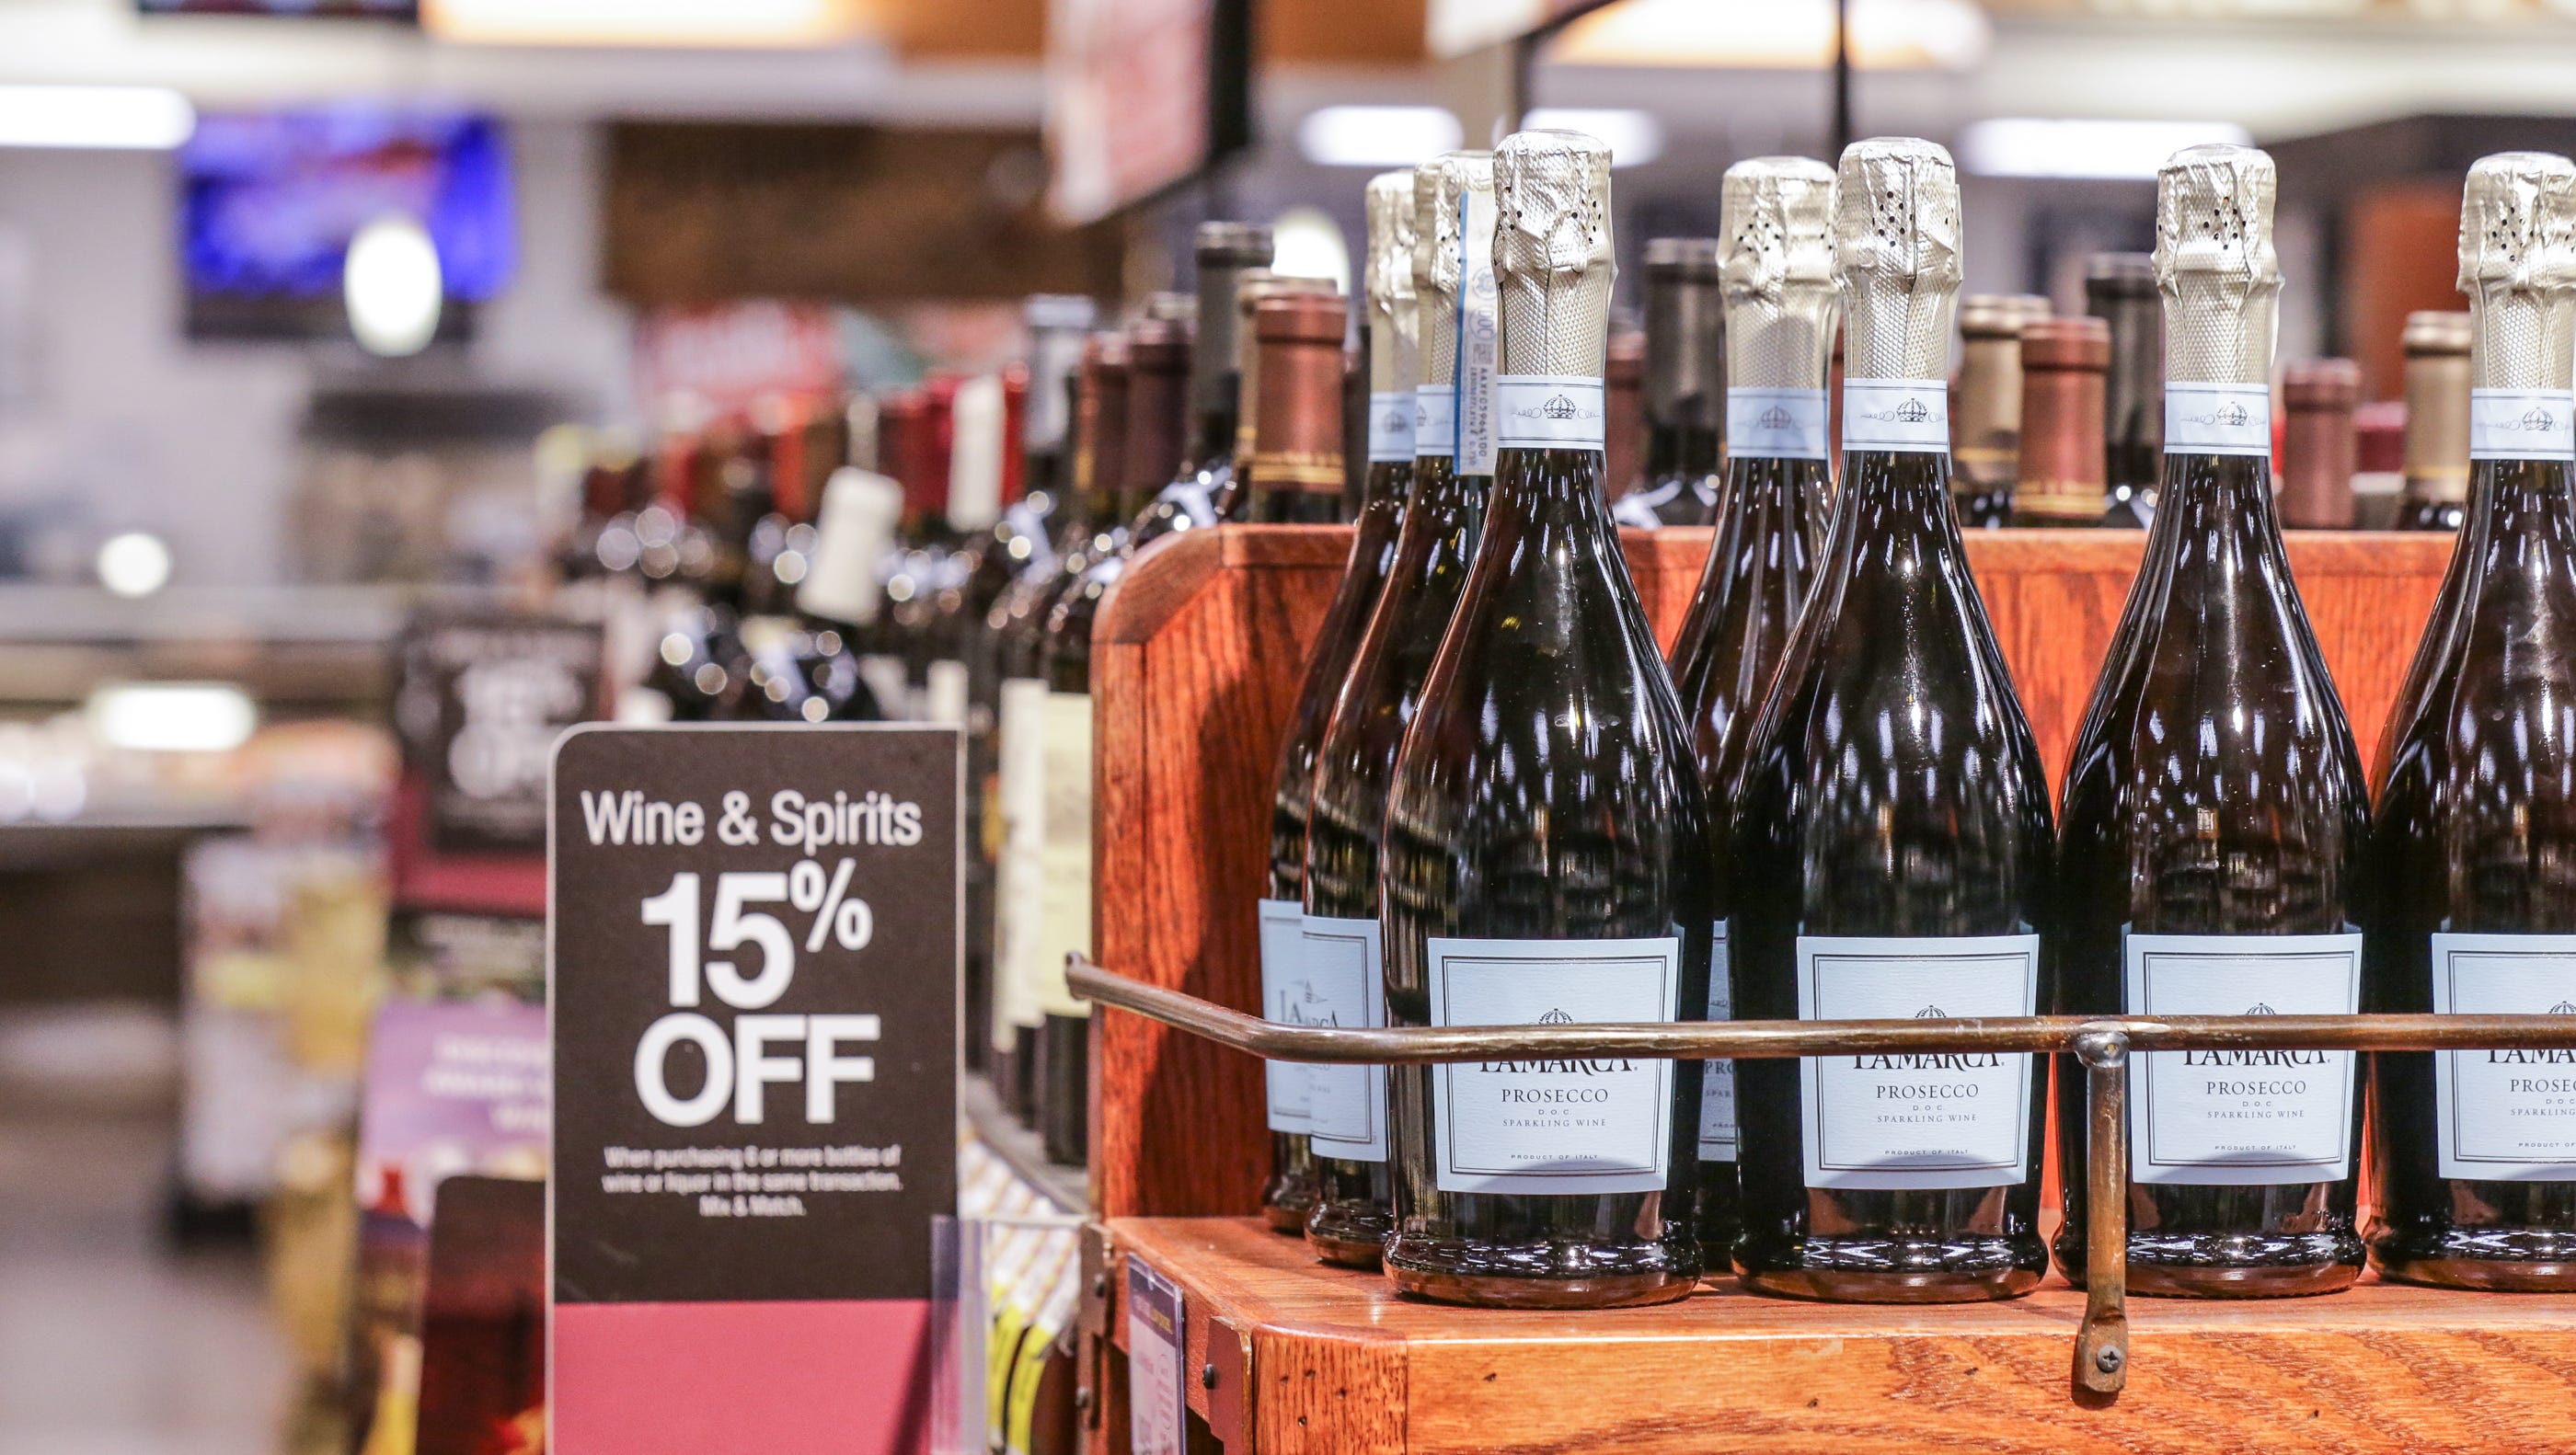 Indiana Sunday alcohol sales: What you need to know